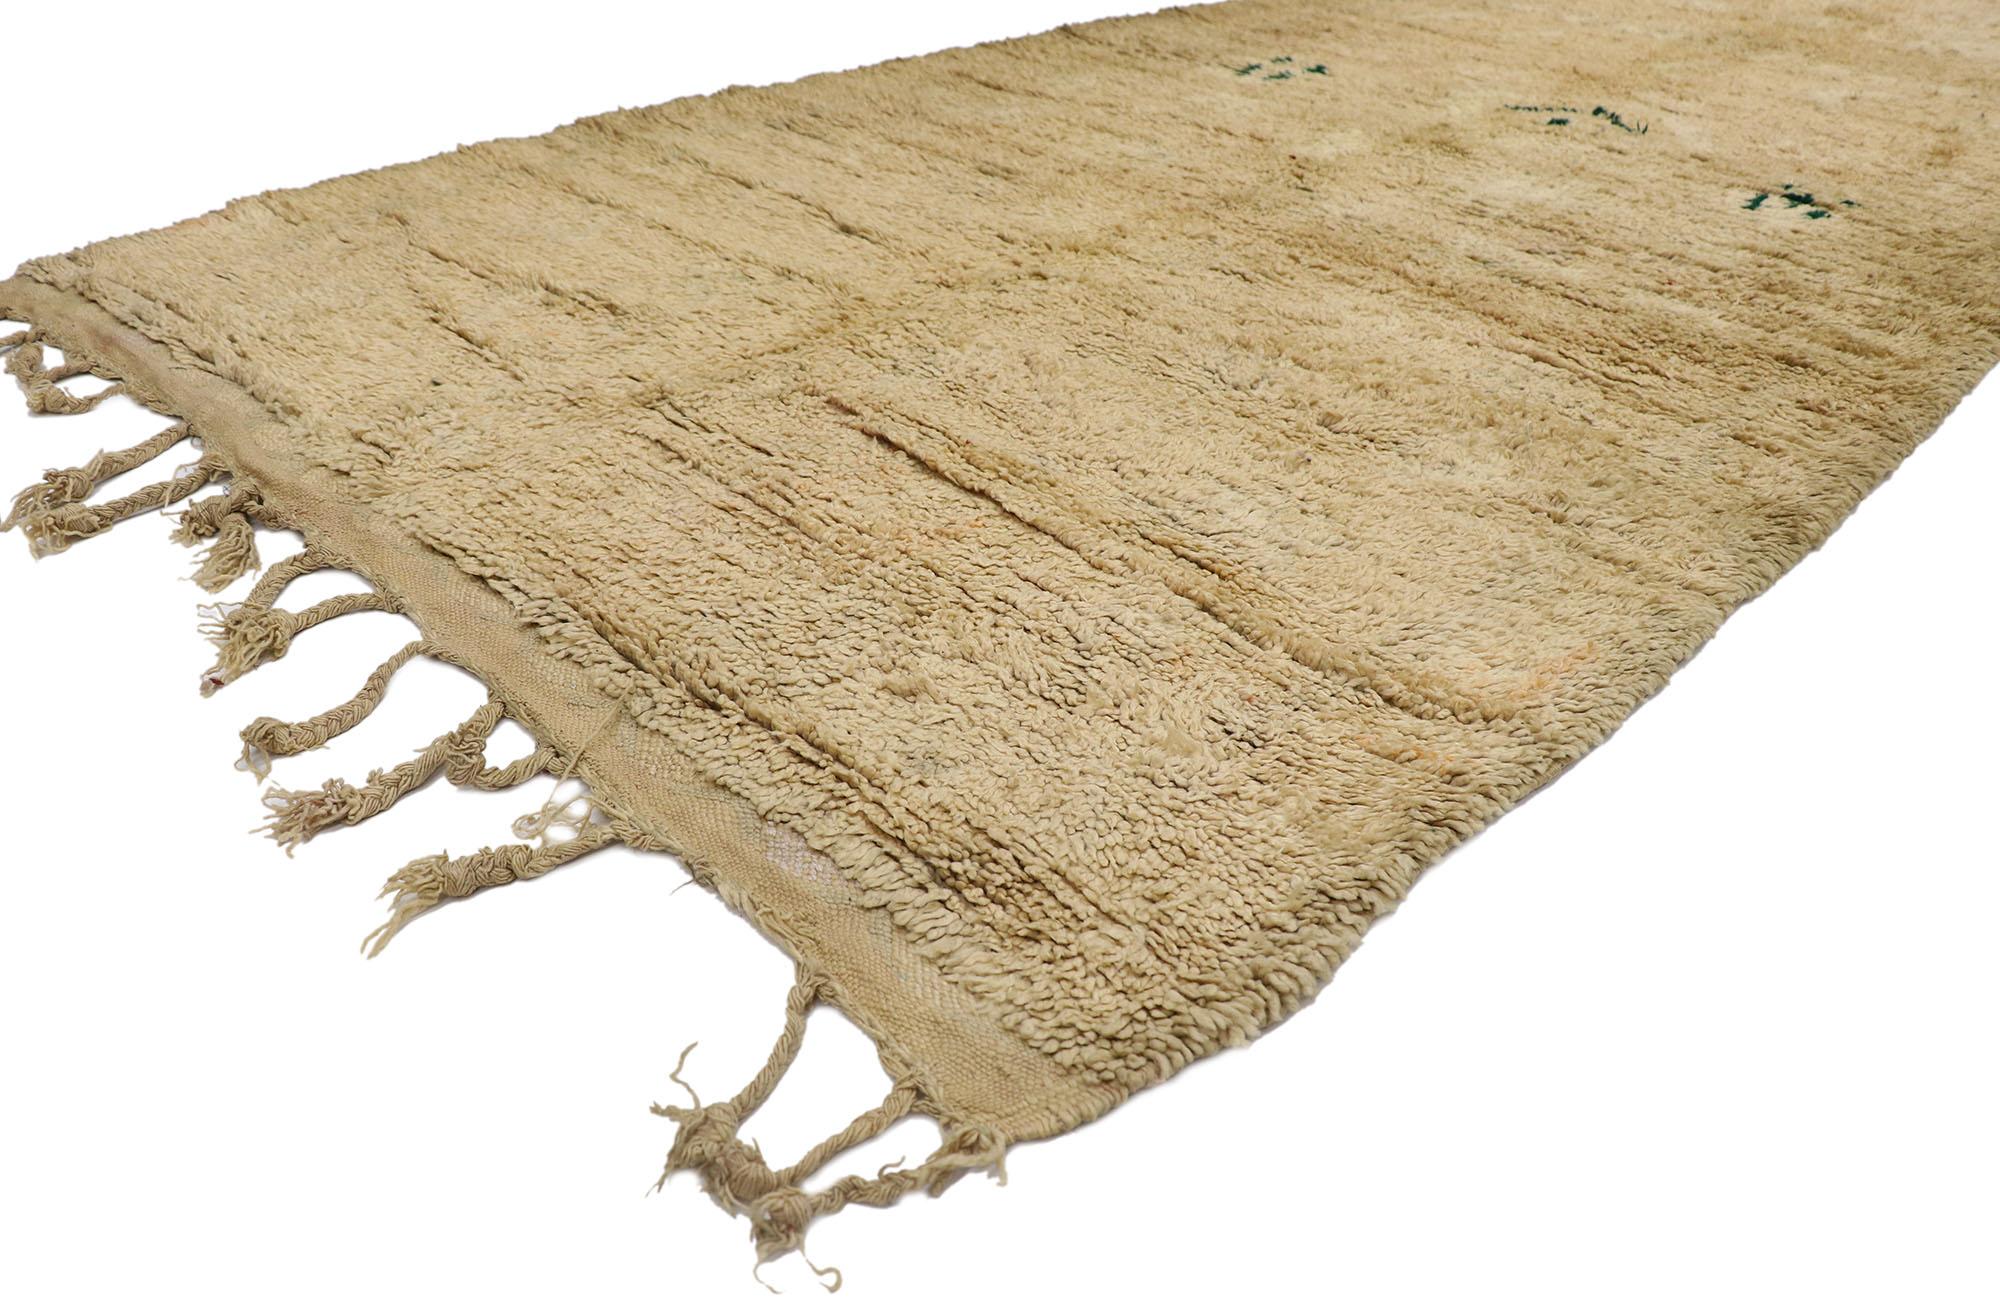 21420 Vintage Moroccan Rug, 05'00 x 10'03.
Nomadic charm meets rustic sensibility in this vintage Berber Moroccan rug. The faded tribal pattern and neutral earth-tone colors woven into this piece work together creating a curated lived-in look while